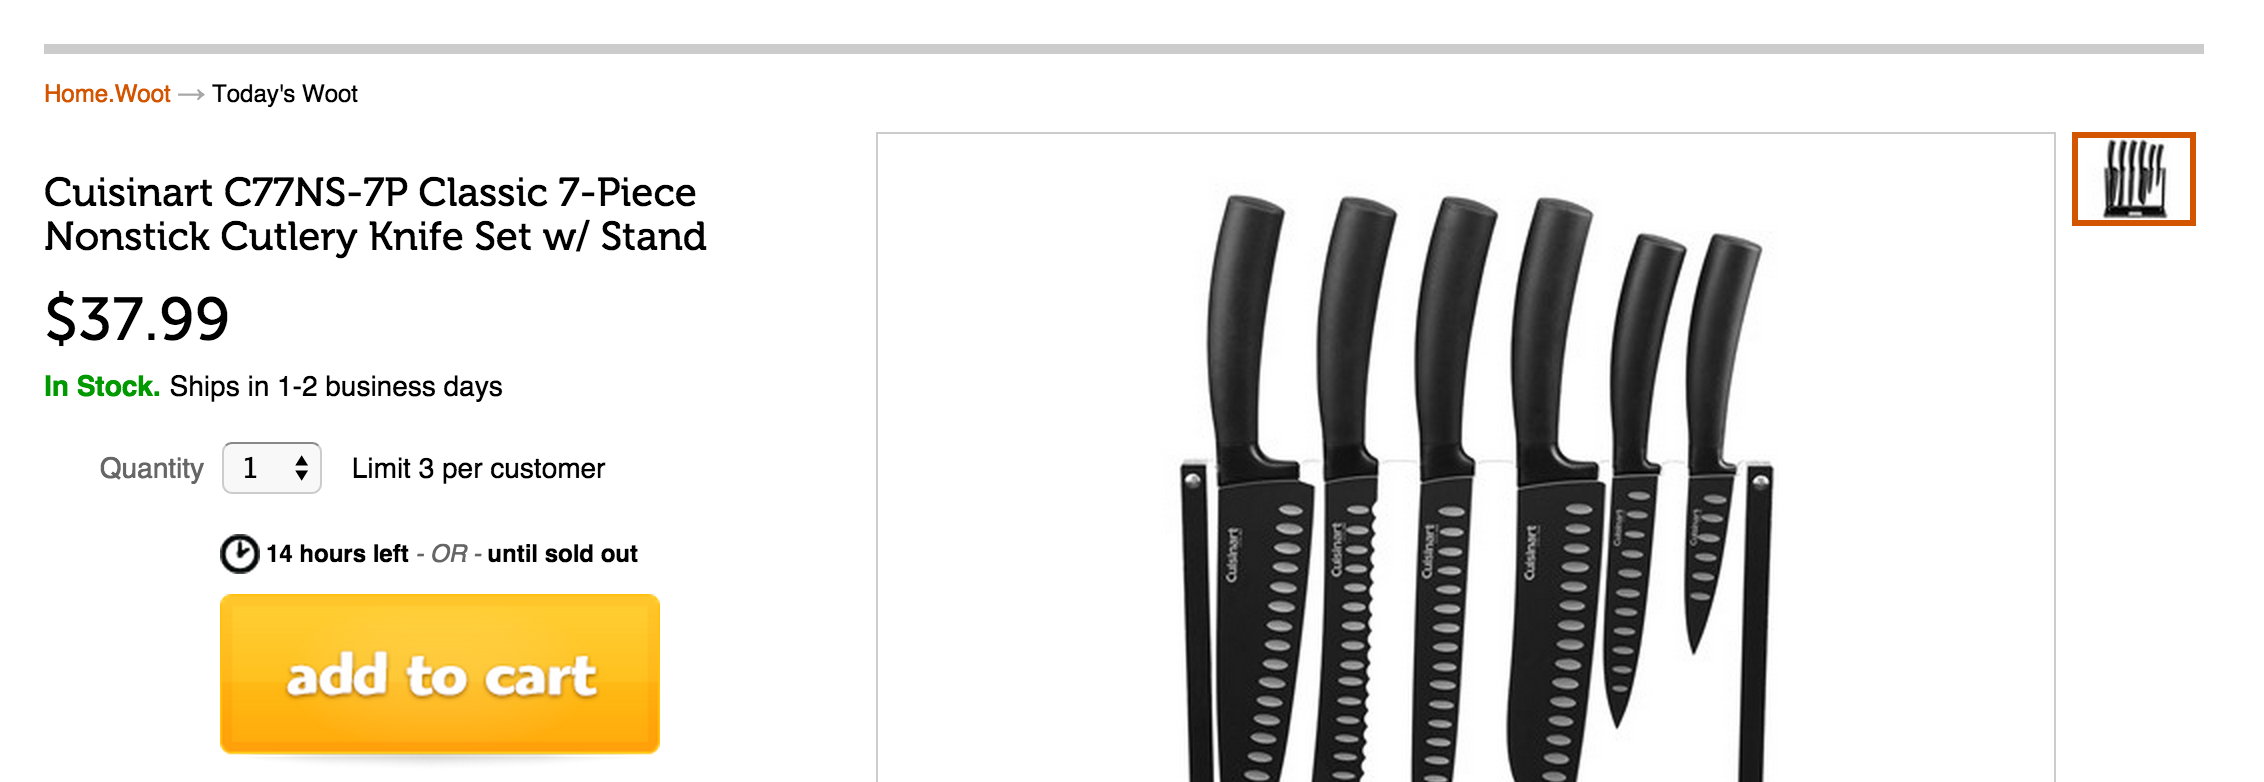 https://9to5toys.com/wp-content/uploads/sites/5/2015/04/cuisinart-classic-7-piece-nonstick-cutlery-knife-set-sale-02.png